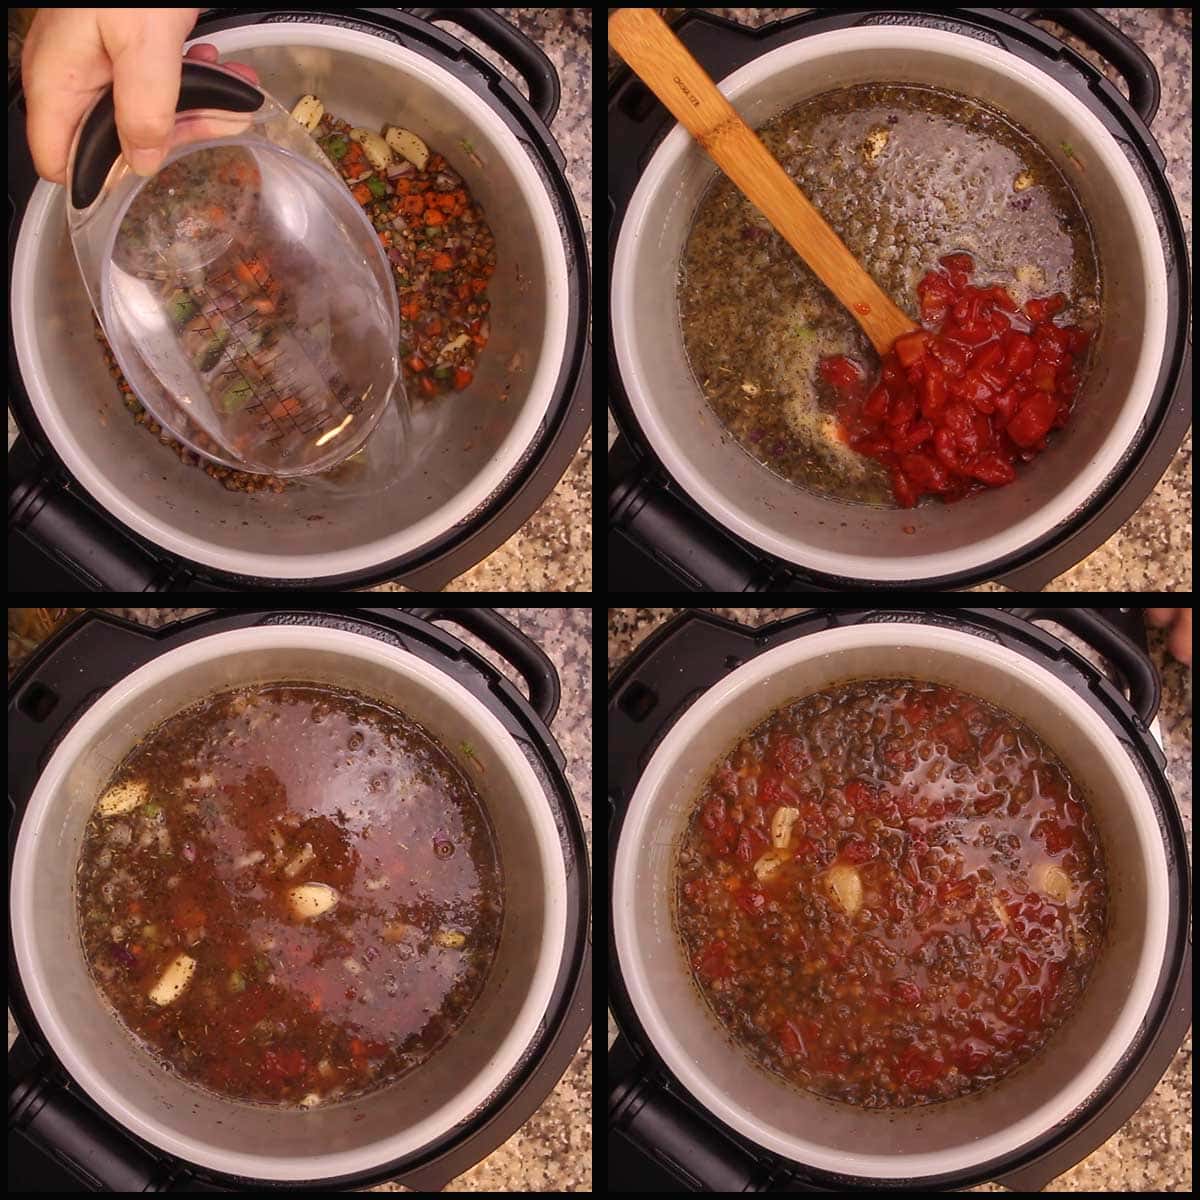 showing the soup before and after the first pressure cook time